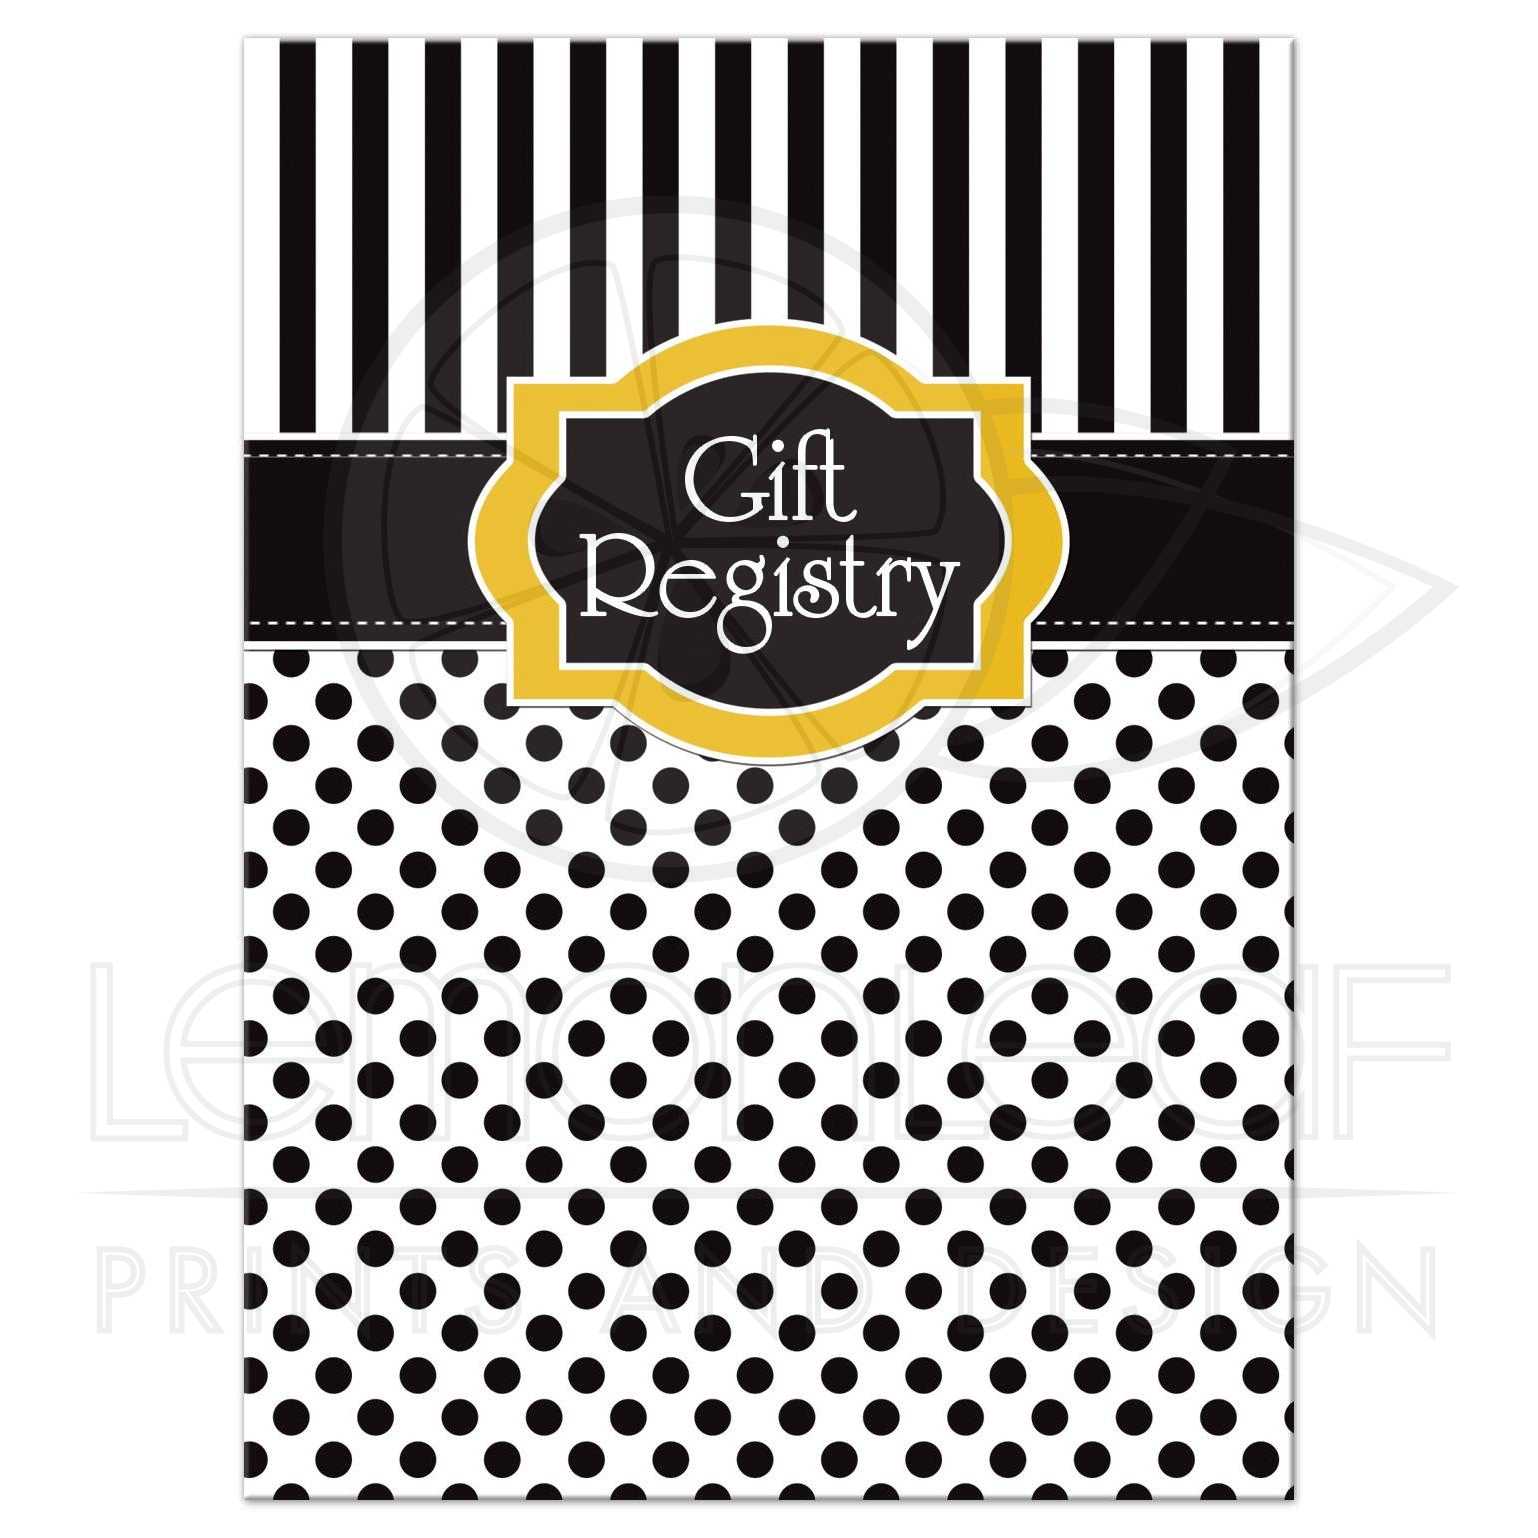 White Stripes with Yellow Logo - Black, White and Yellow Polka Dots and Striped Gift Registry